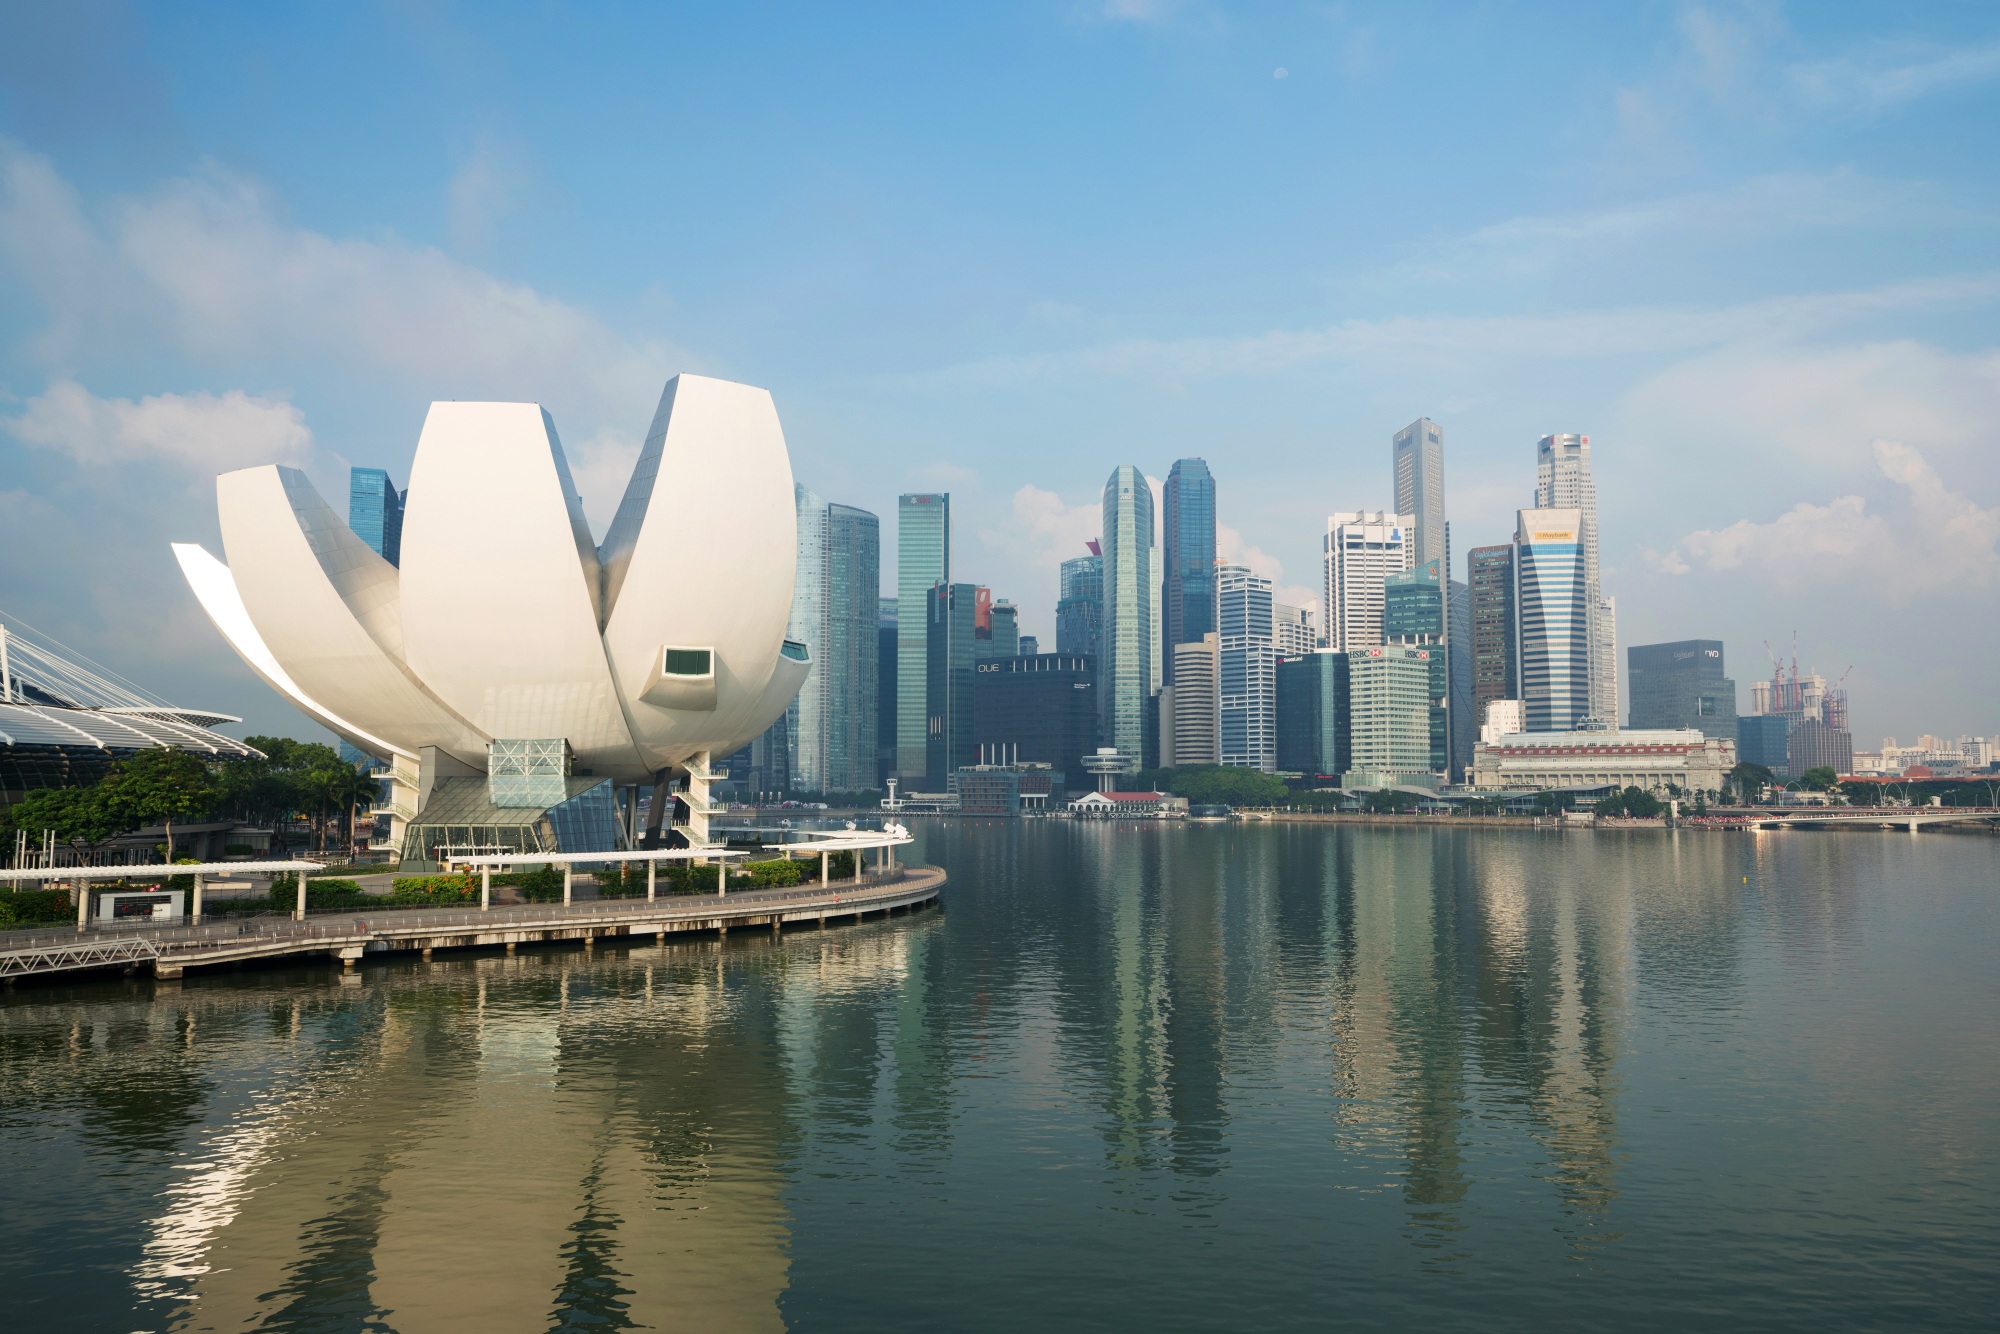 The central business district in Singapore | BLOOMBERG